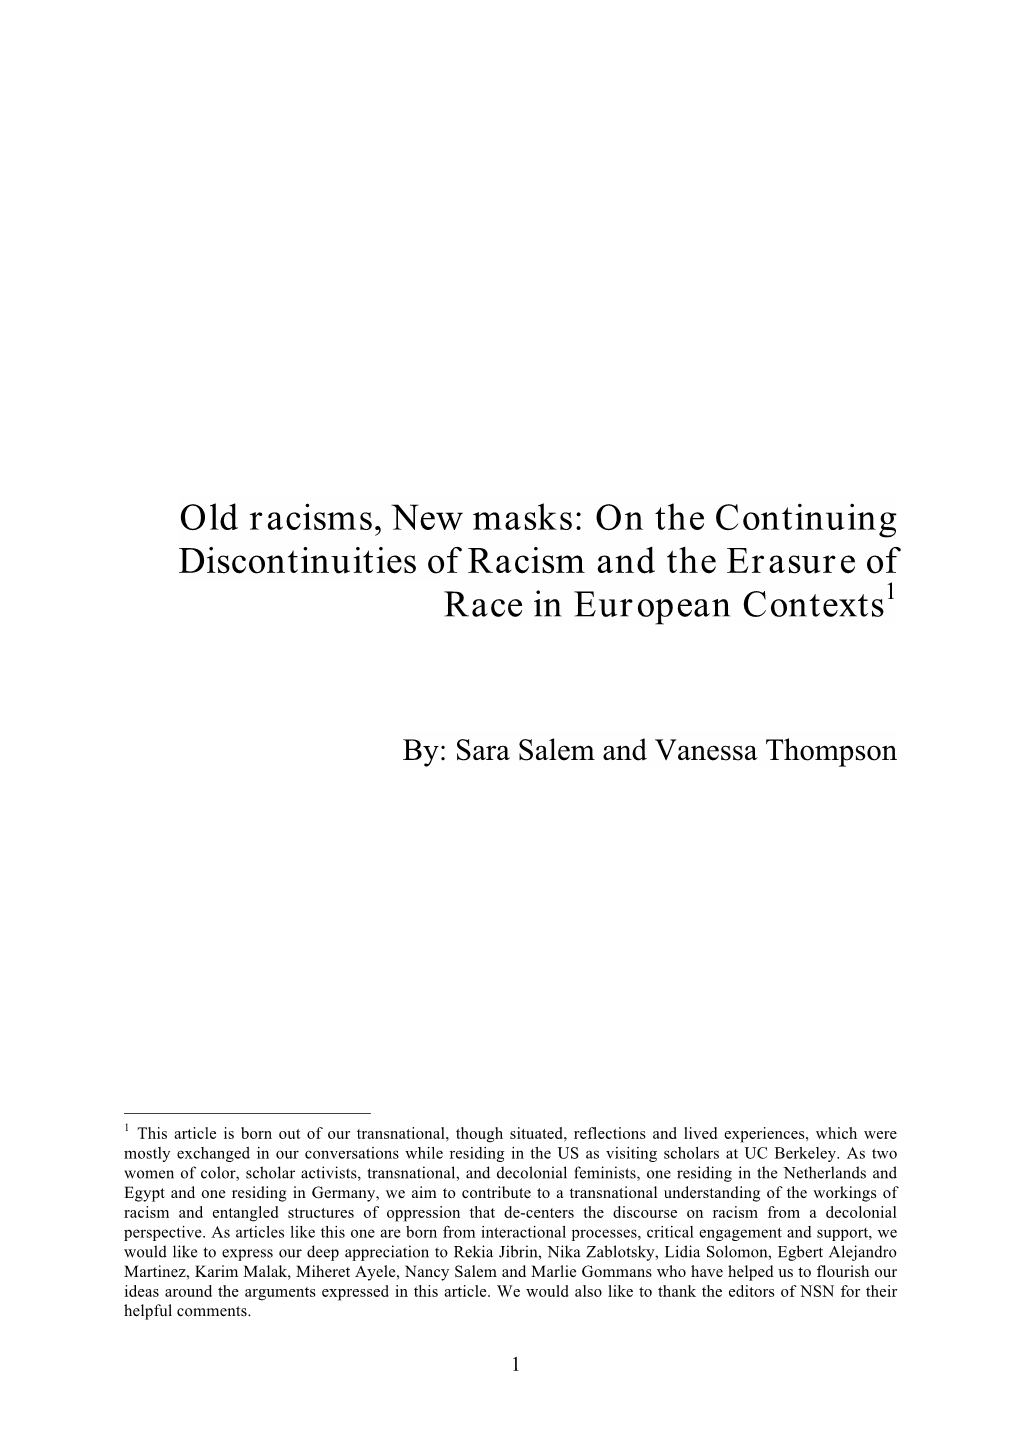 On the Continuing Discontinuities of Racism and the Erasure of Race in European Contexts1